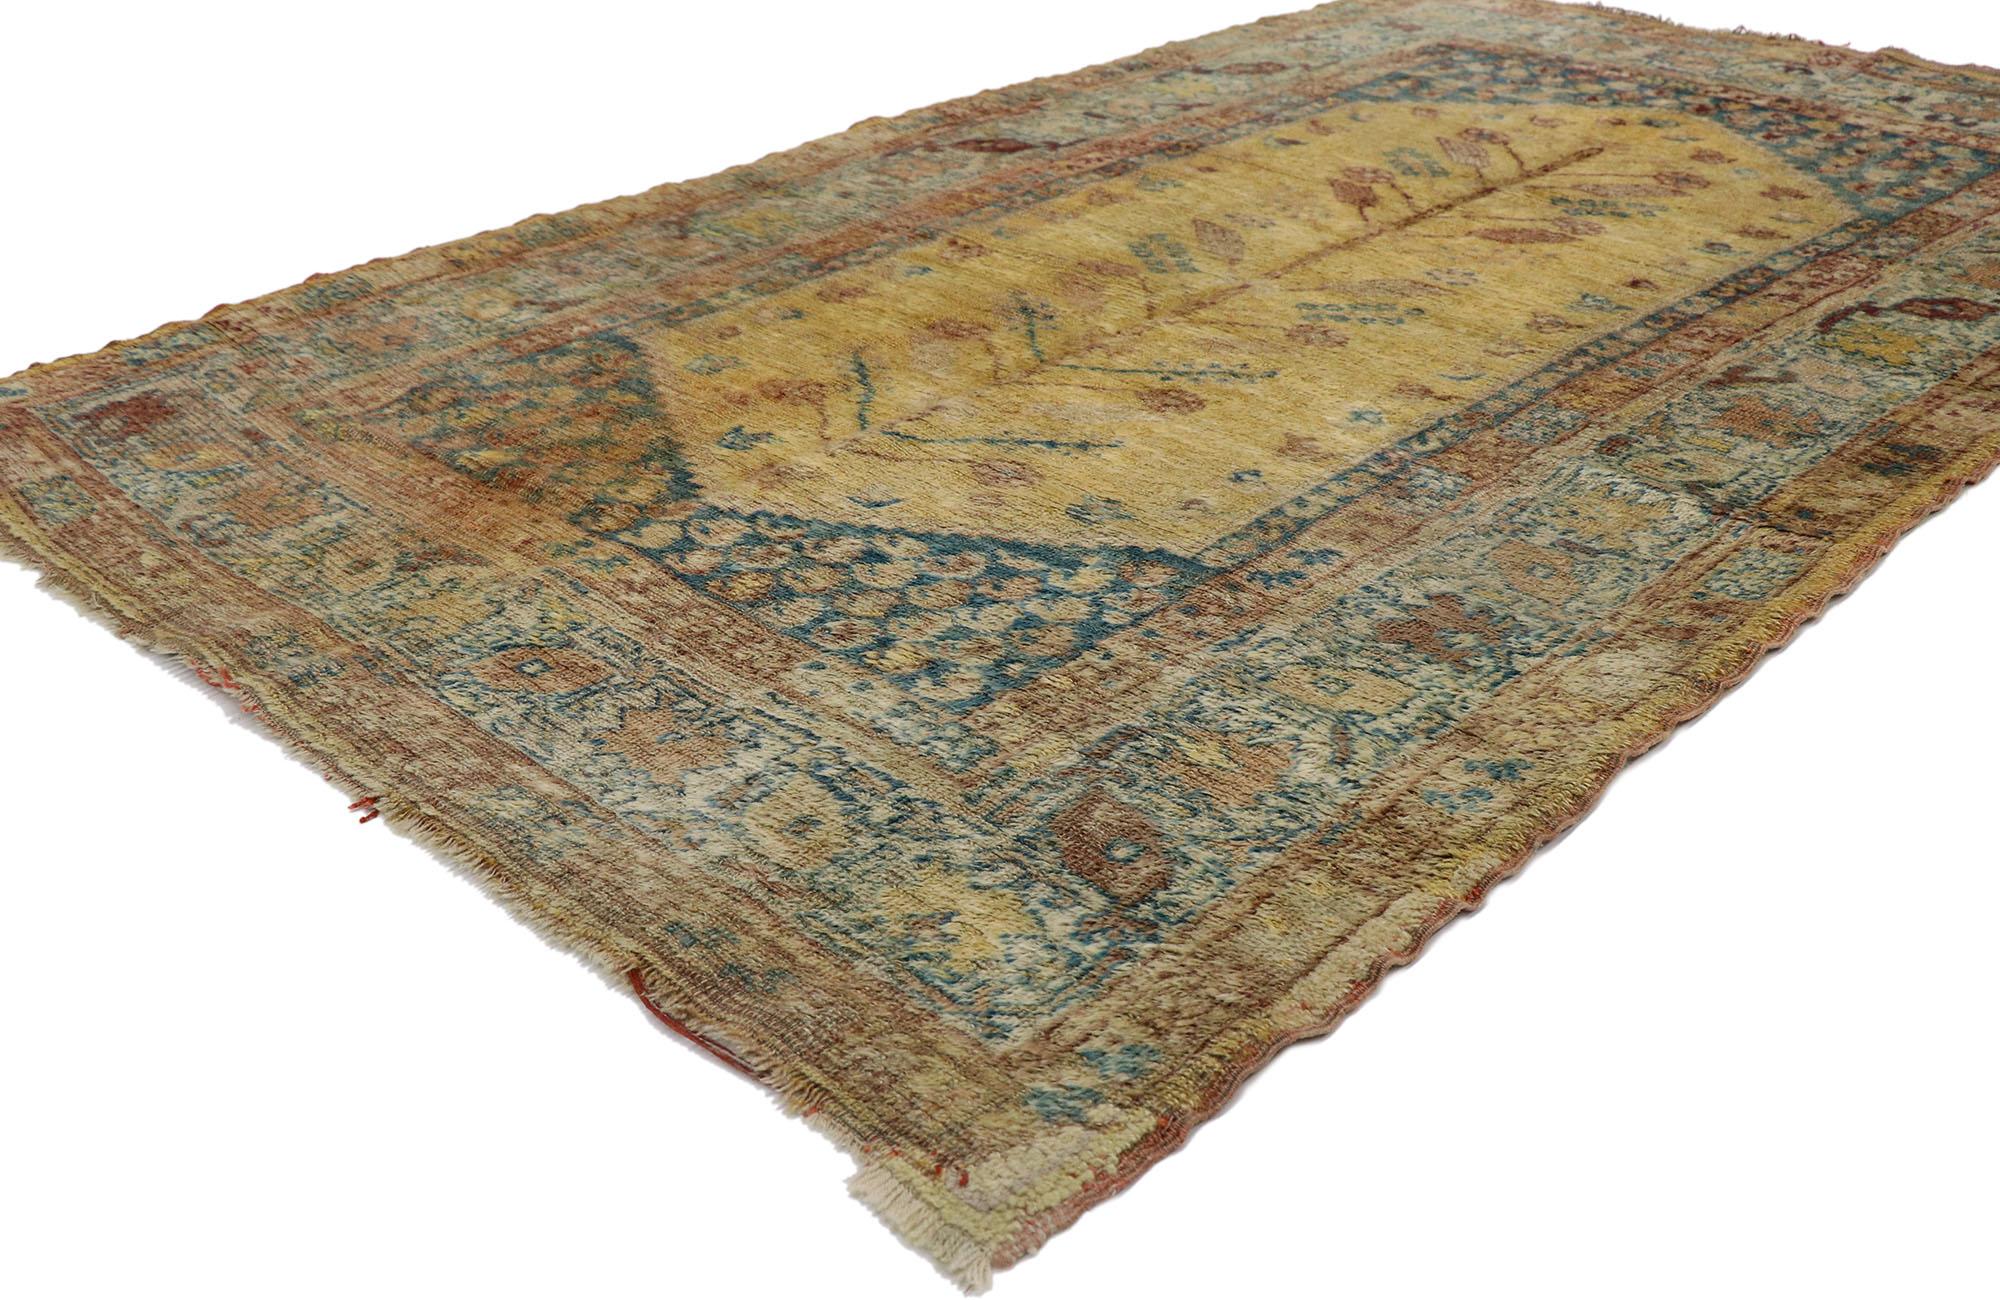 73610, distressed antique Turkish Oushak rug with Modern Mediterranean and Italian Tuscan style. ??Emanating timeless elegance and warm, earthy colors, this hand knotted wool distressed antique Turkish Oushak rug beautifully embody a modern